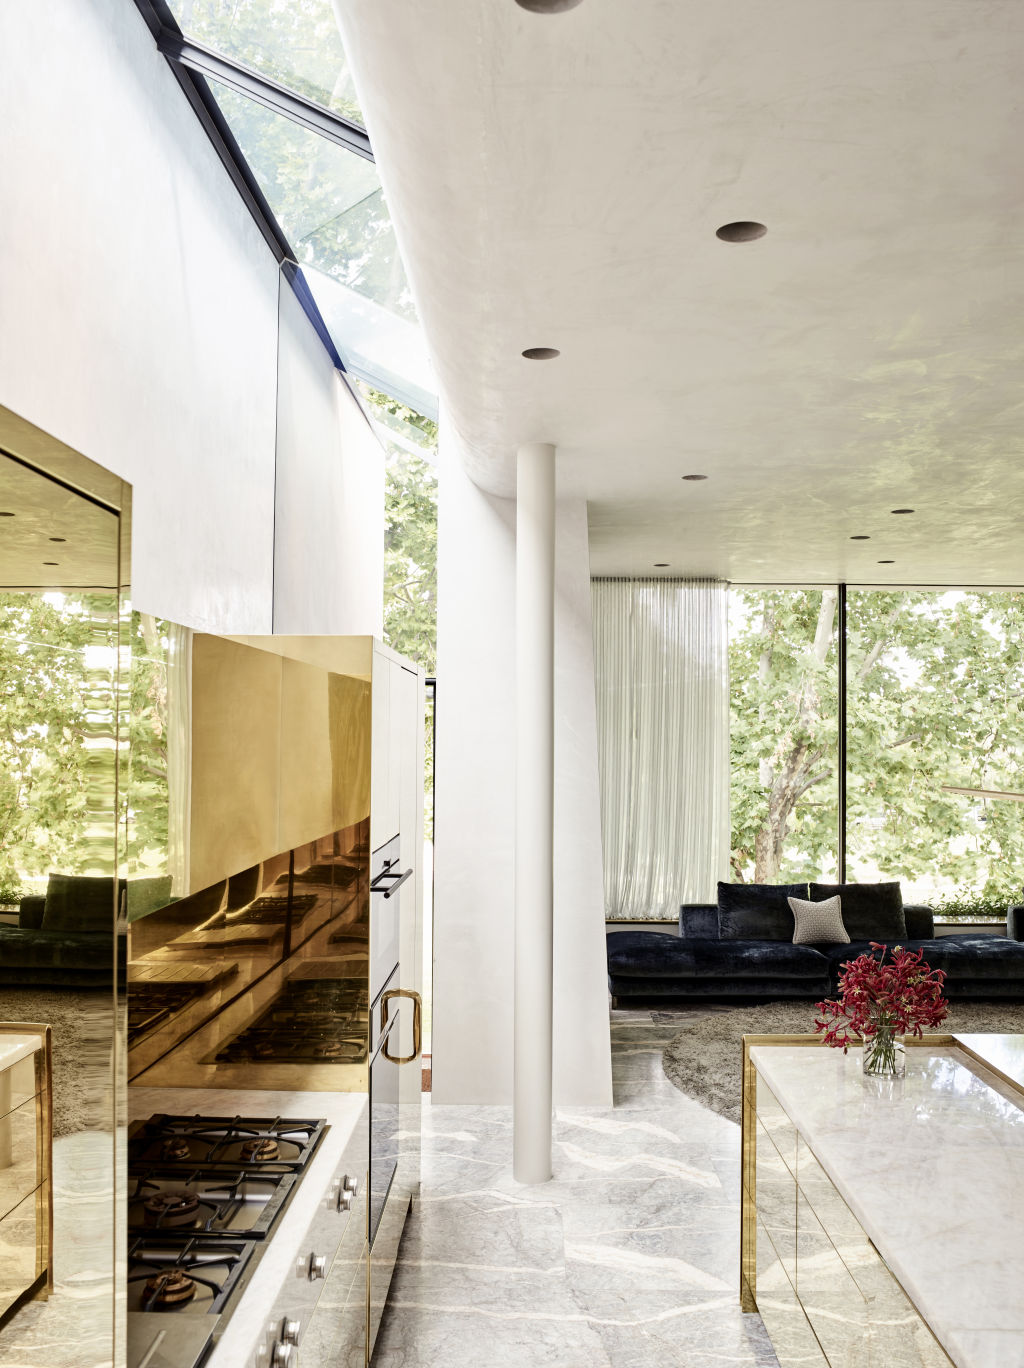 The kitchen at Armadale Residence by Rob Mills Architecture & Interiors. Photo: Mark Roper